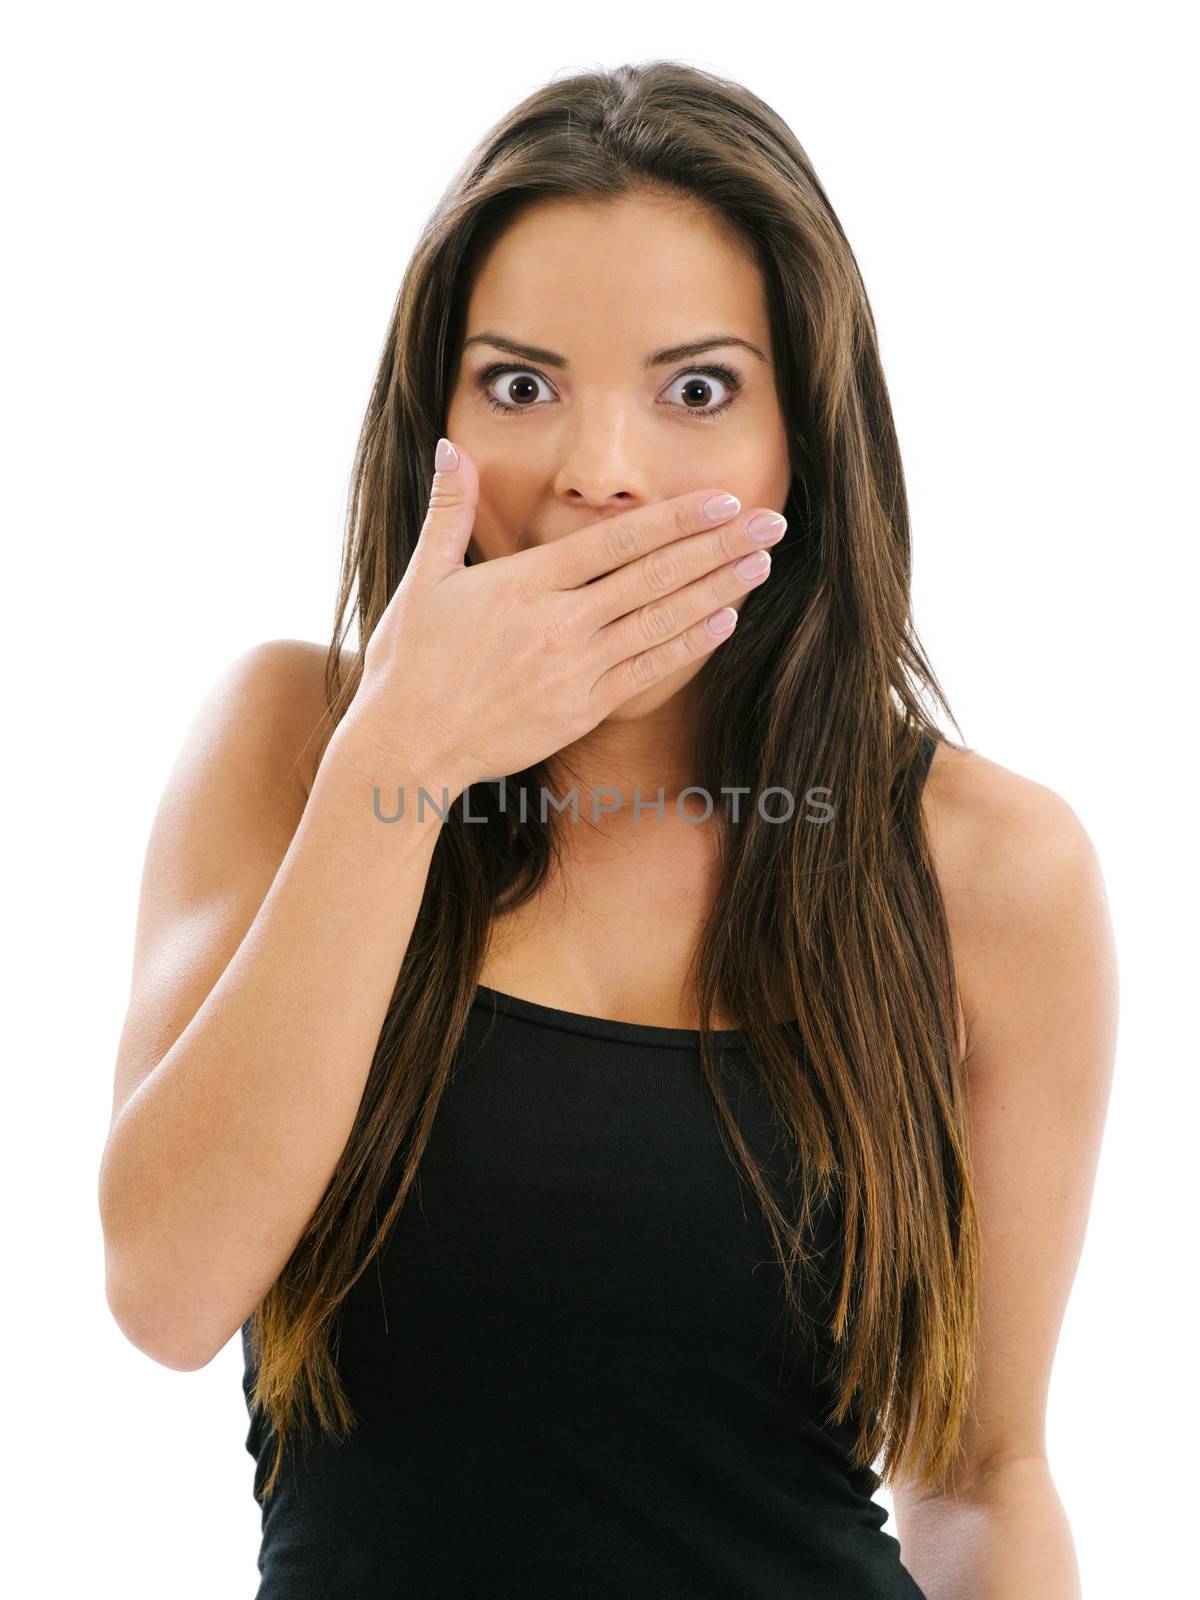 Photo of a beautiful female with her hand over her mouth and eyes wide from shock.